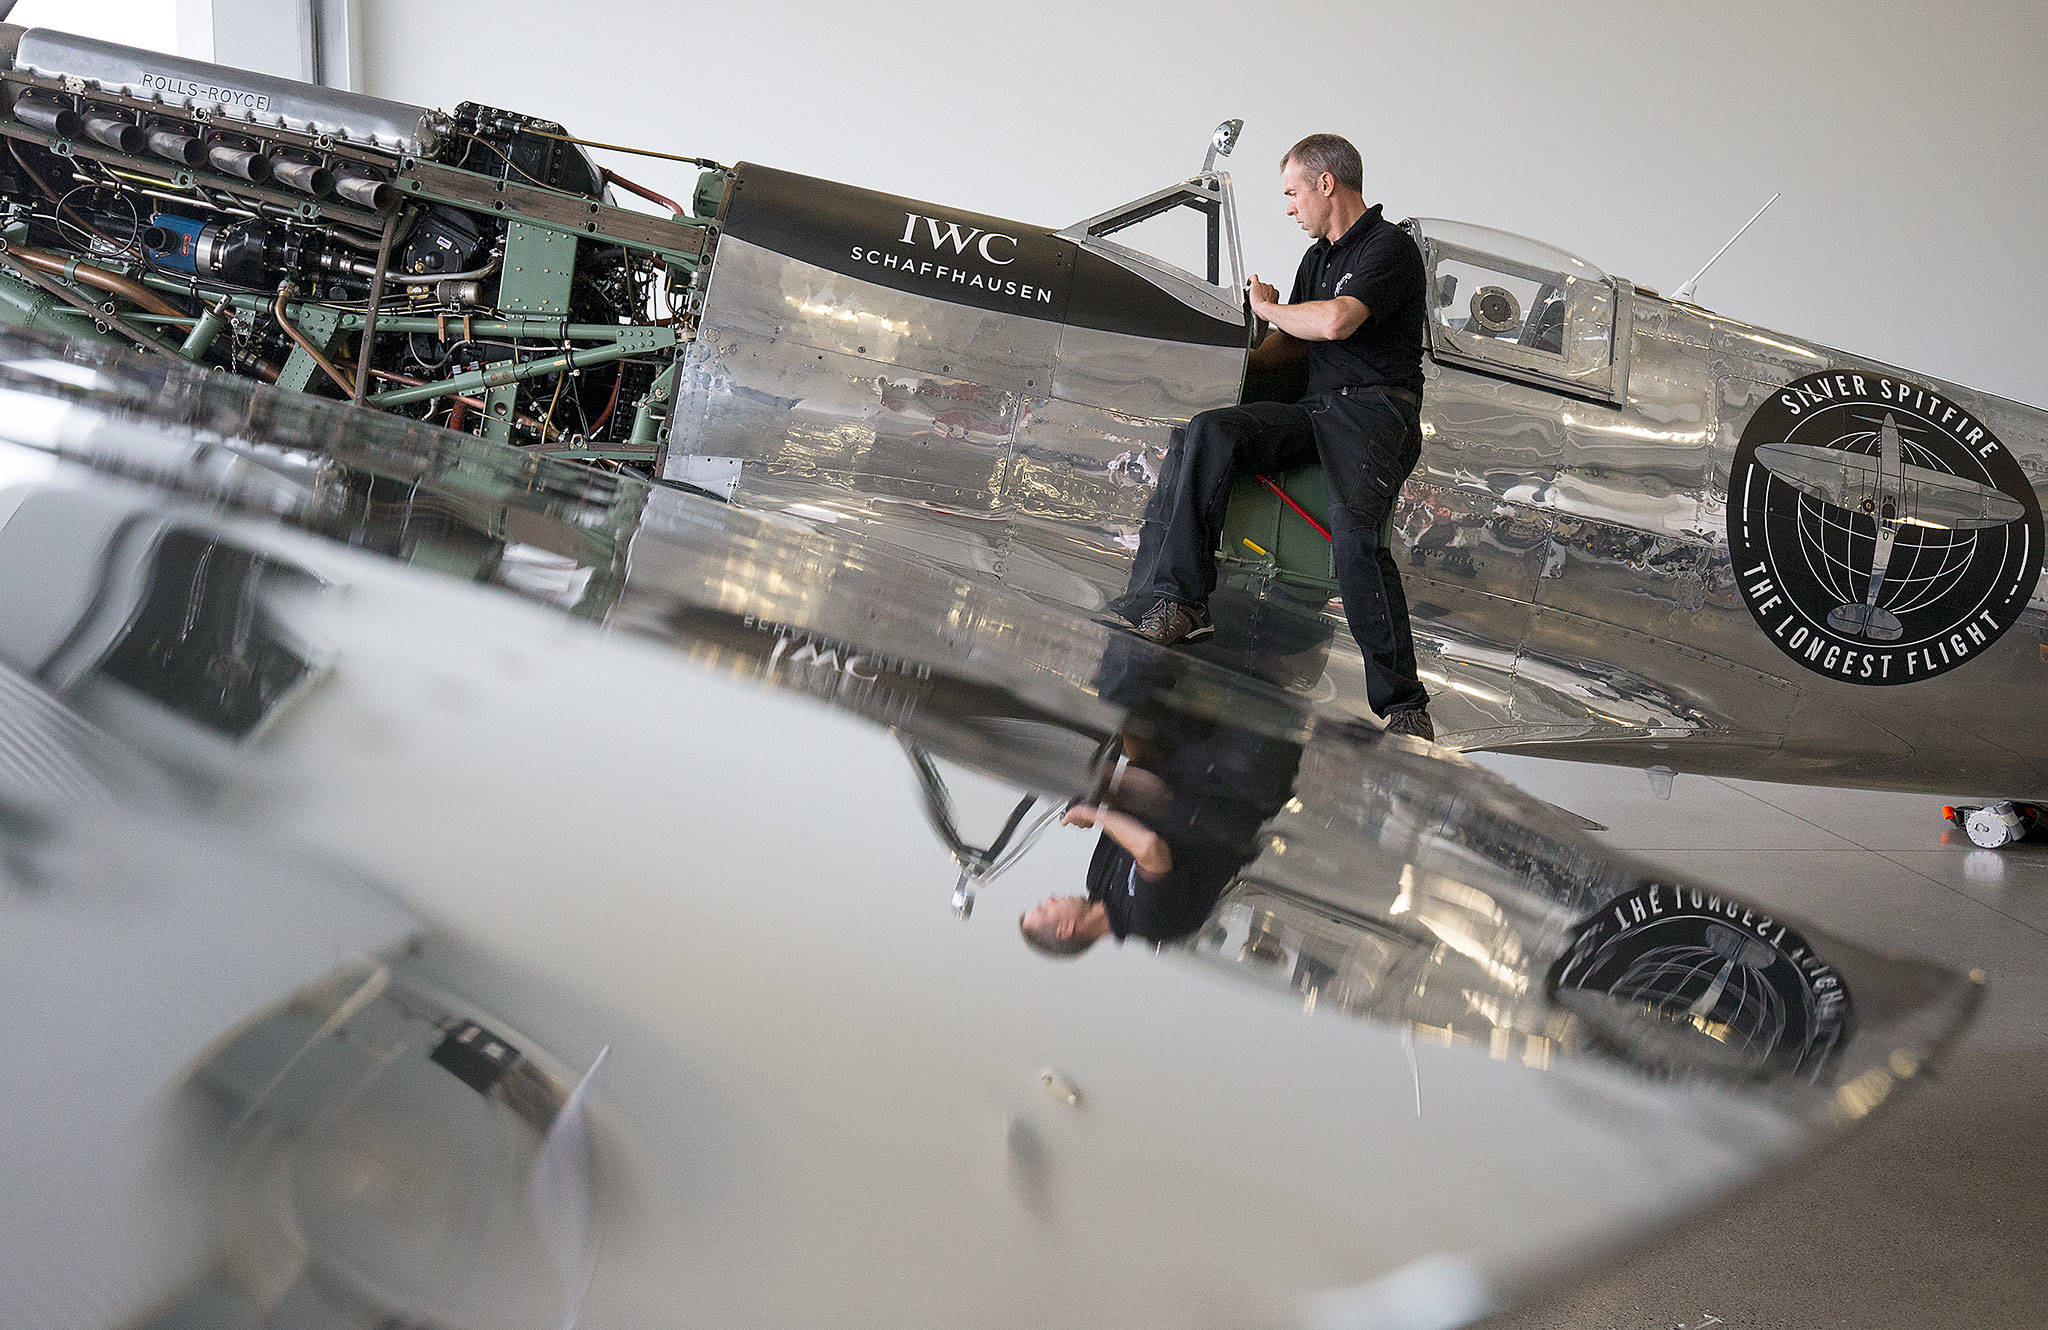 Reflected in the polished aluminum wing, Chief Engineer Martin Overall reaches into the cockpit of the Silver Spitfire, a World War II Supermarine Spitfire Mk.IX fighter plane, during a 50-hour maintenance checkup at the Historic Flight Foundation on Wednesday in Mukilteo. (Andy Bronson / The Herald)